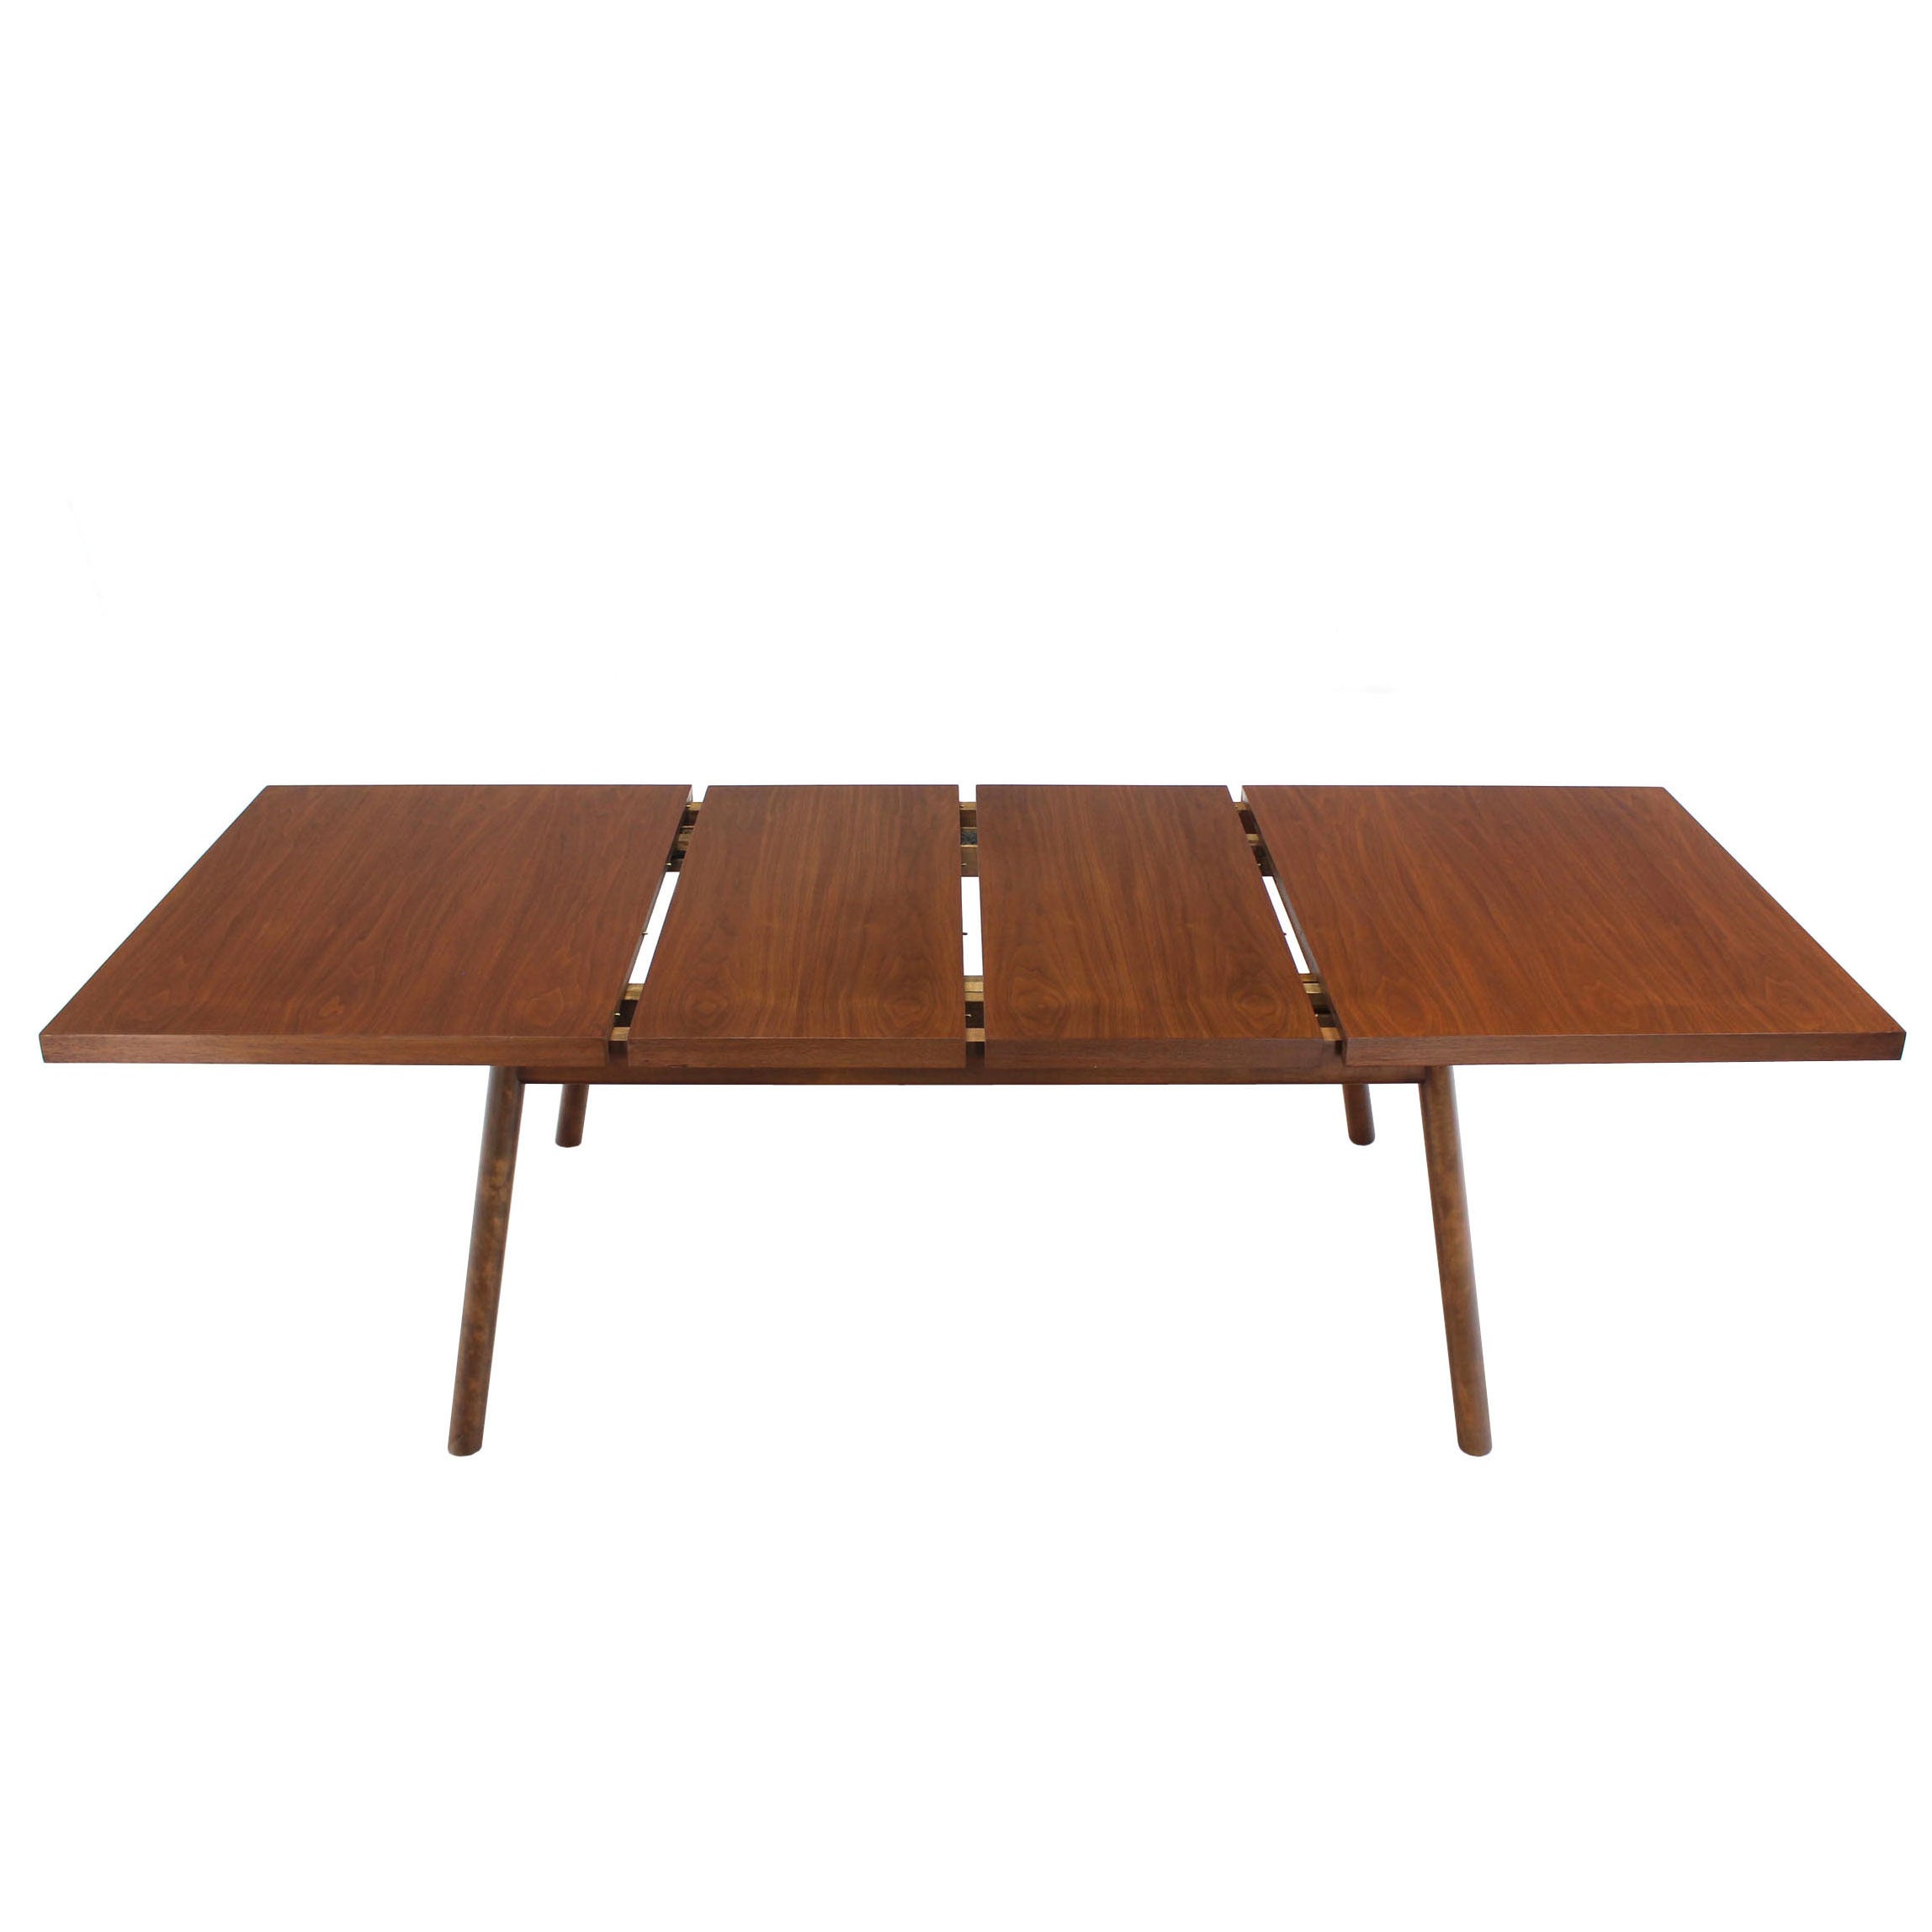 Robsjohn Gibbings Walnut Extention Dining Table with Two Leaves